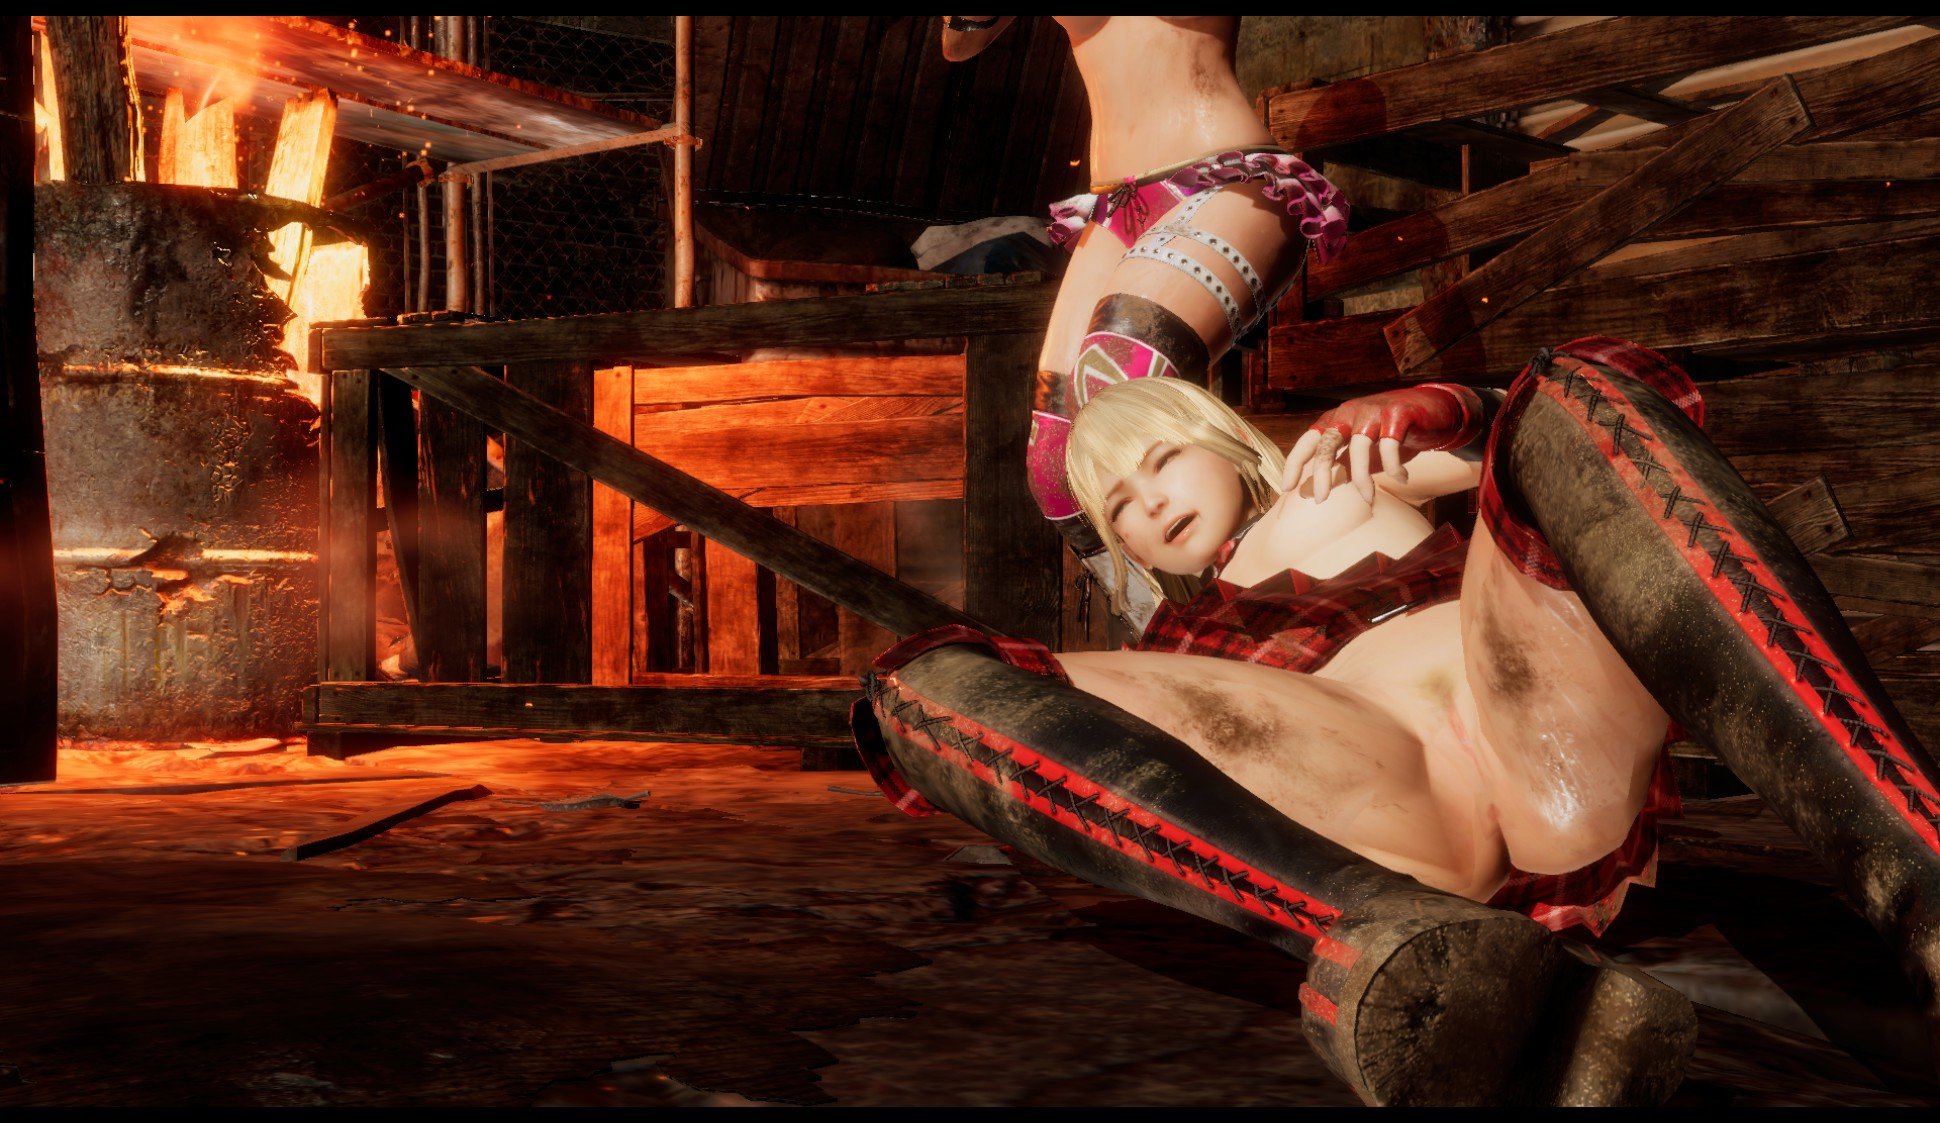 Dead or Alive 6: Nude Mode / Ver: 1.22.